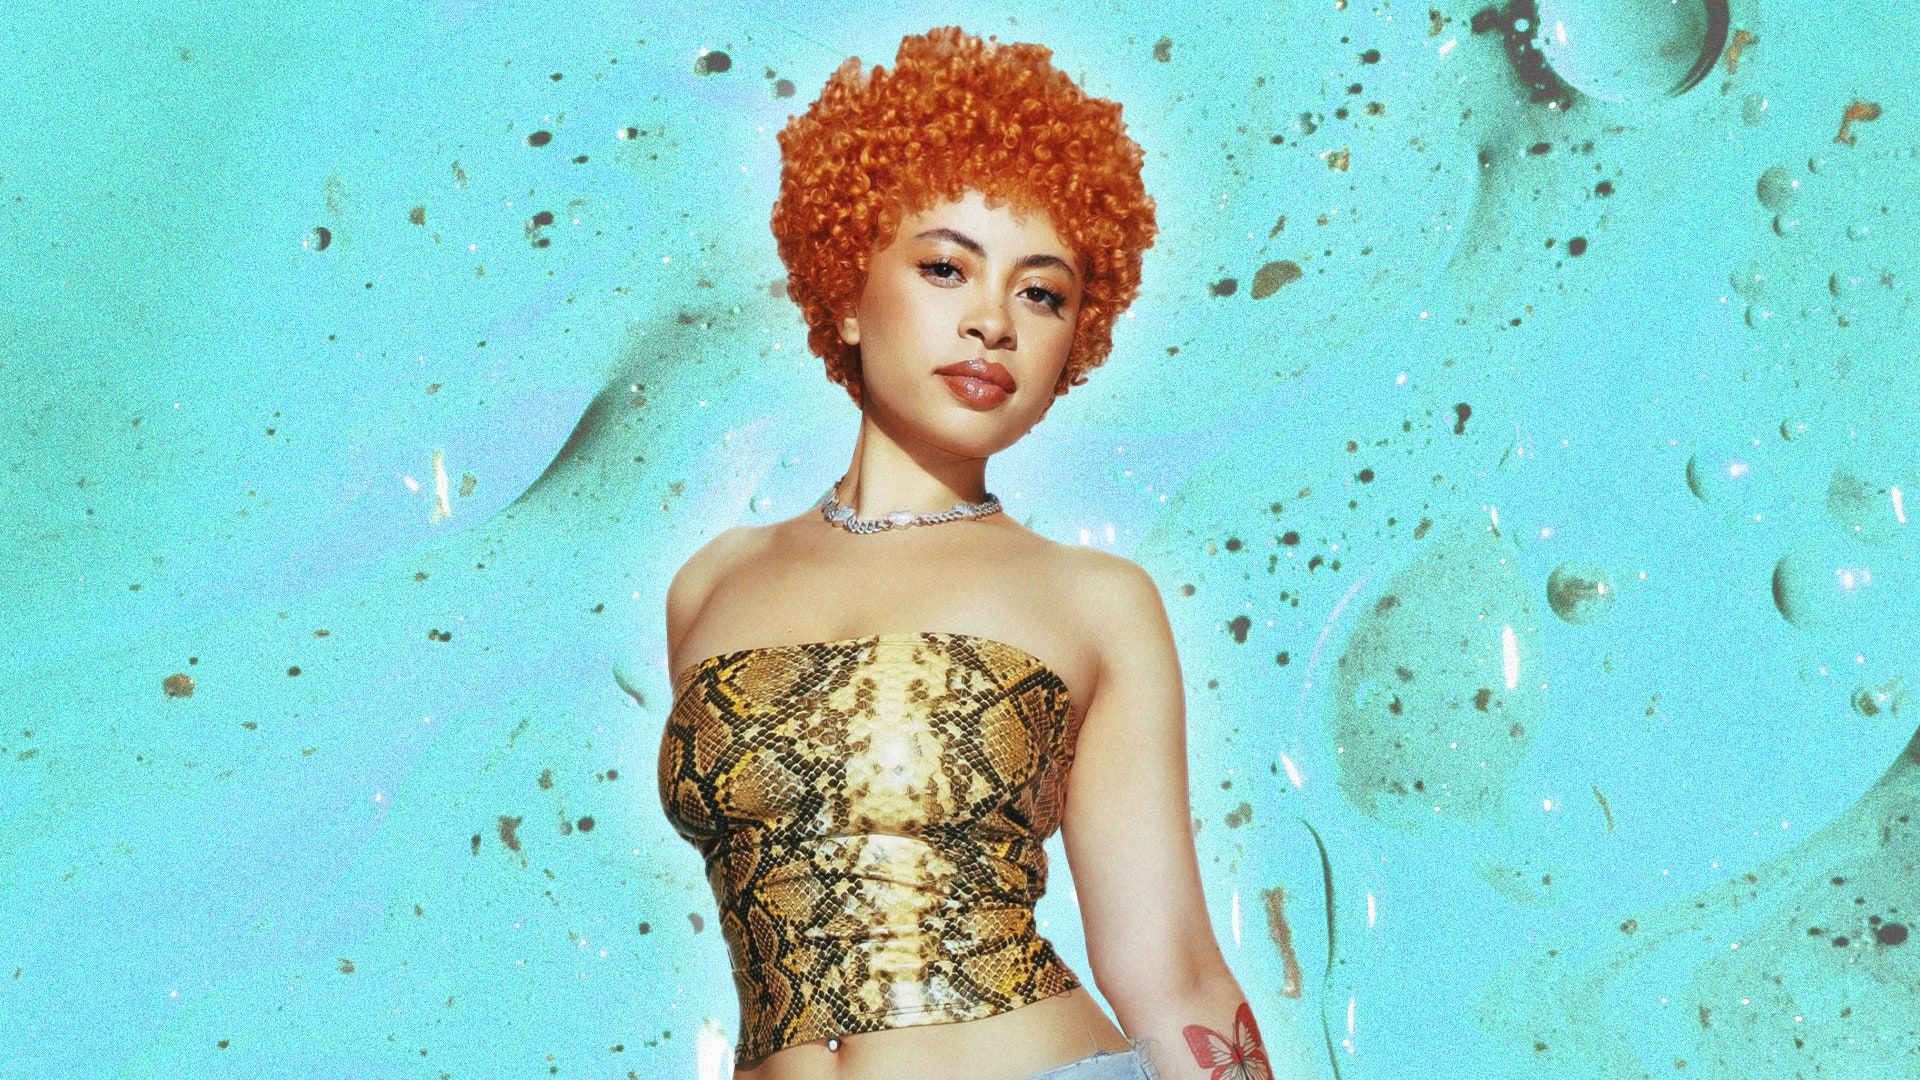 A portrait of a woman with orange hair, wearing a gold snakeskin crop top and pants. - Ice Spice